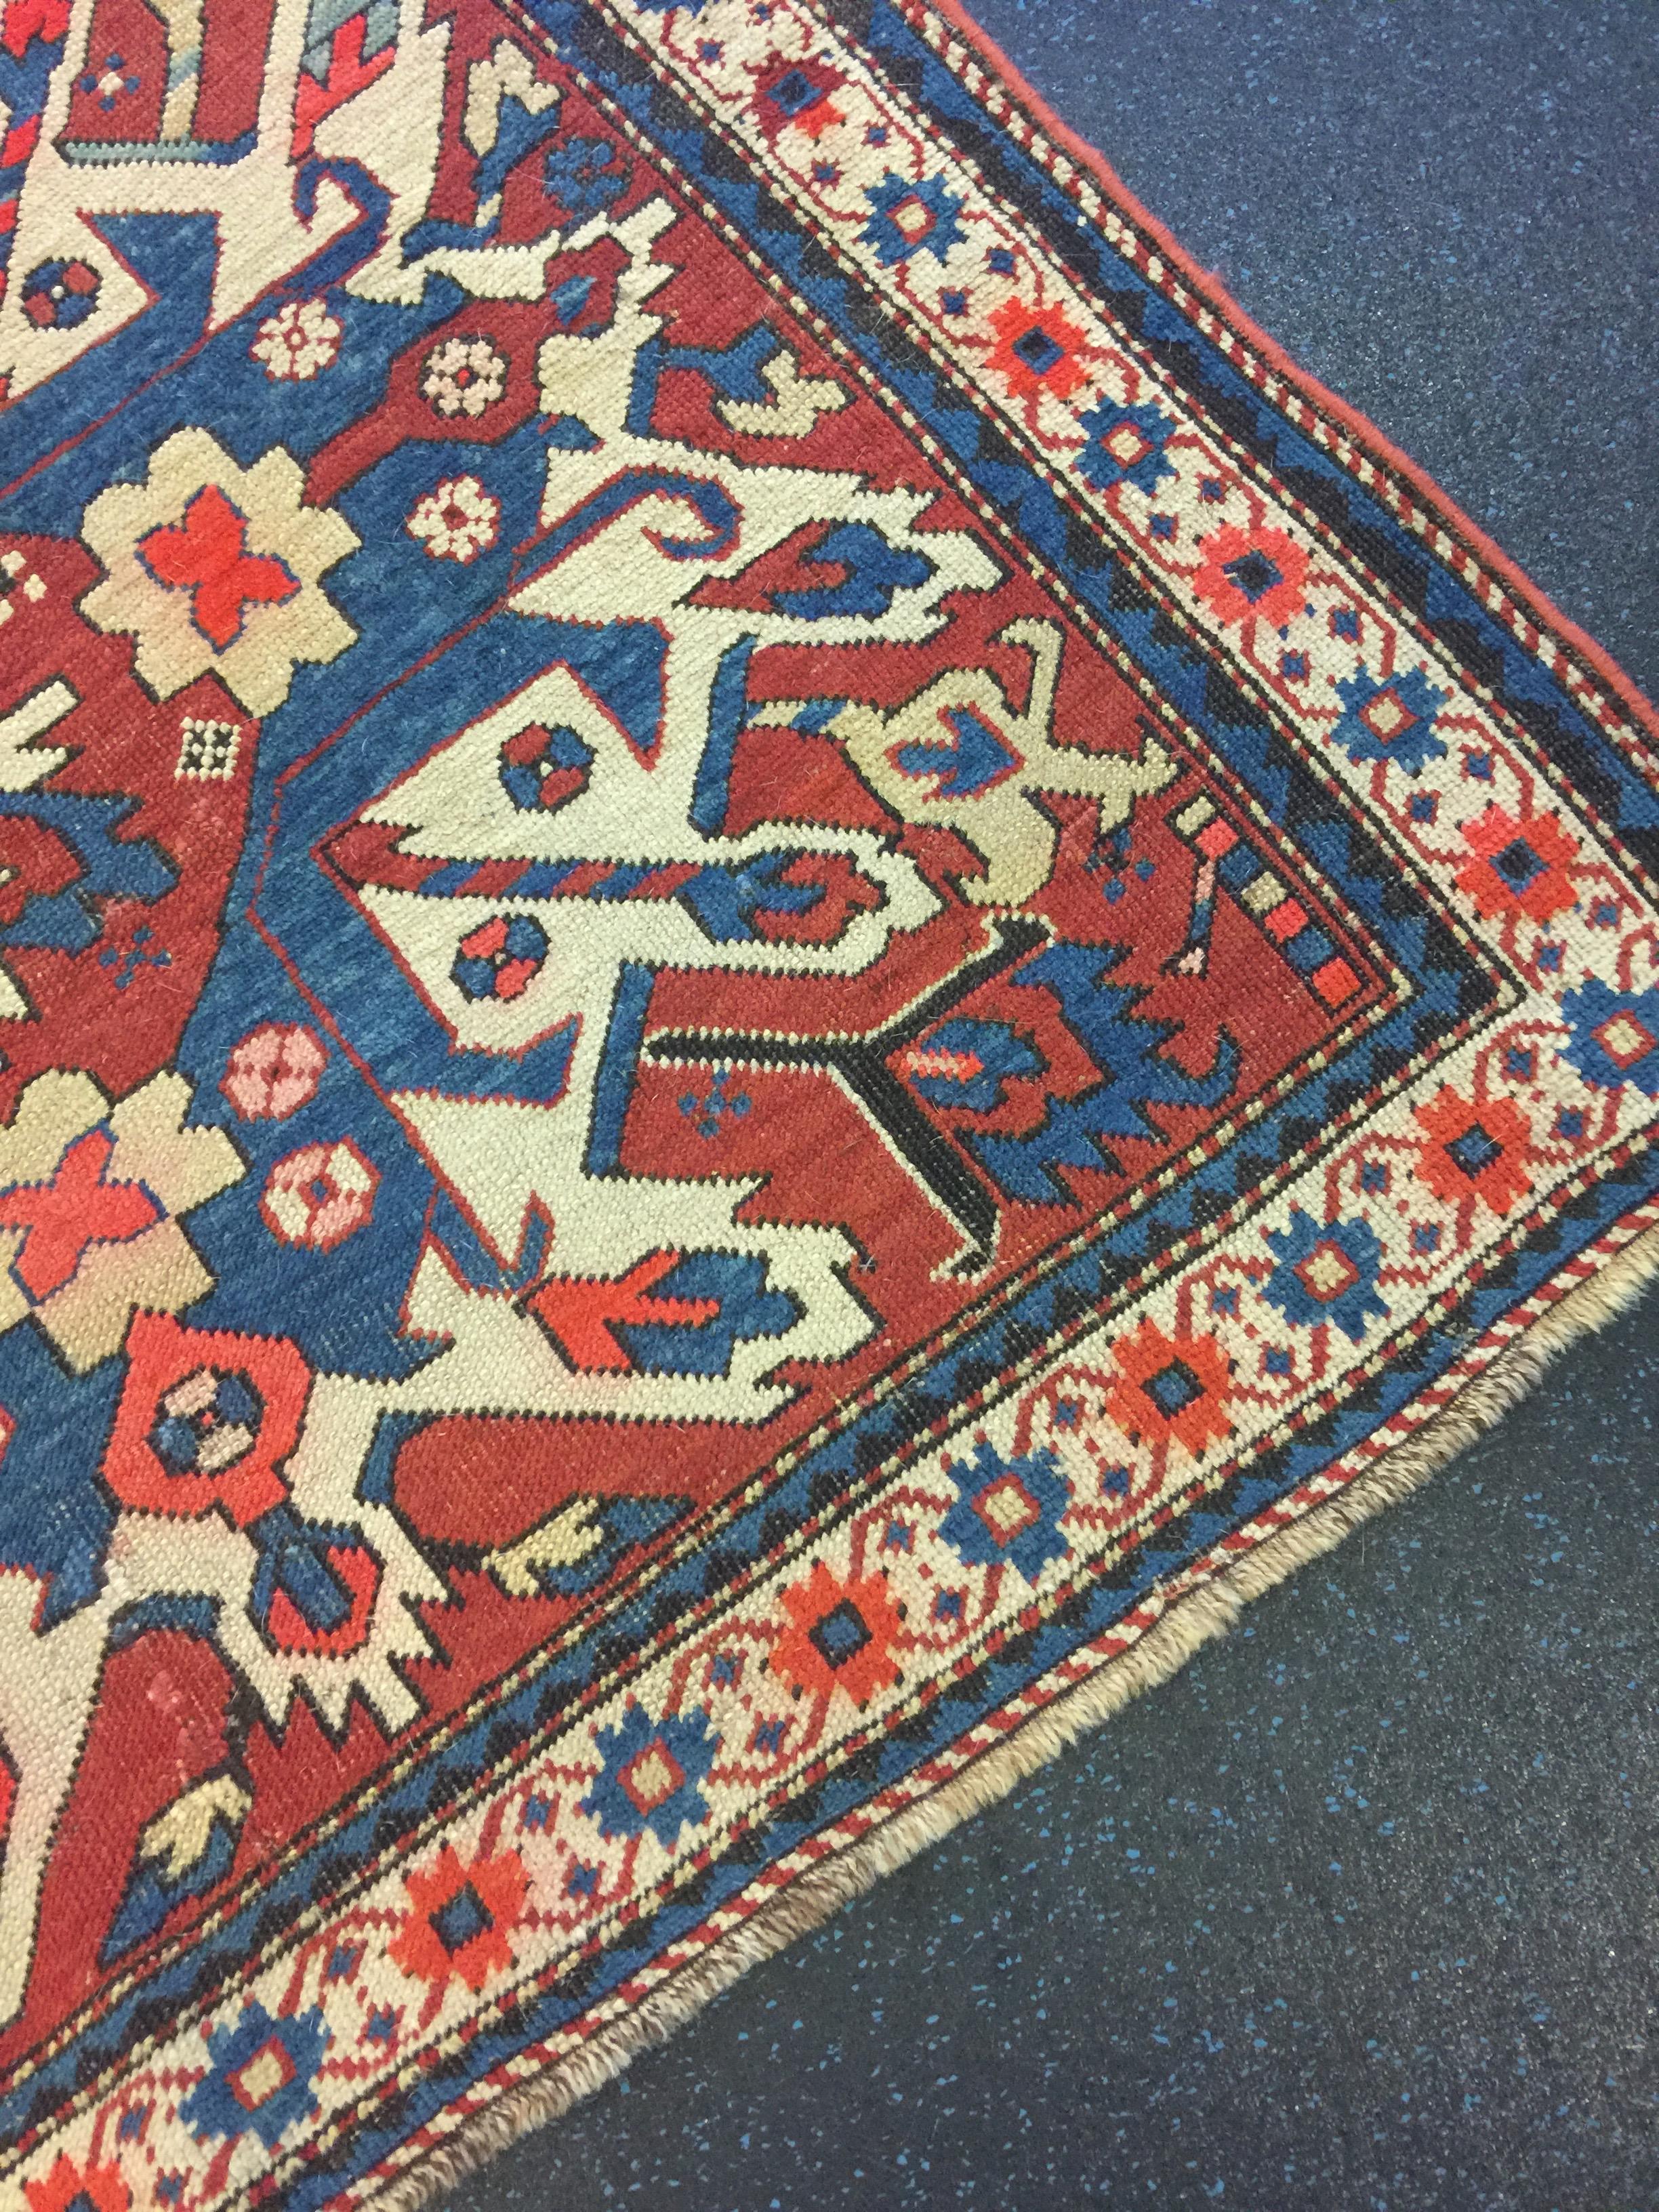 19th century Eagle Kazak Chelaberd wool carpet rugs set (2 rugs), wonderful colors and sunburst detailing. Wool, hand-knotted, vegetable dye colors and many interesting details, circa 1870. Sole collector proprietor acquired in the 1970s in Iran